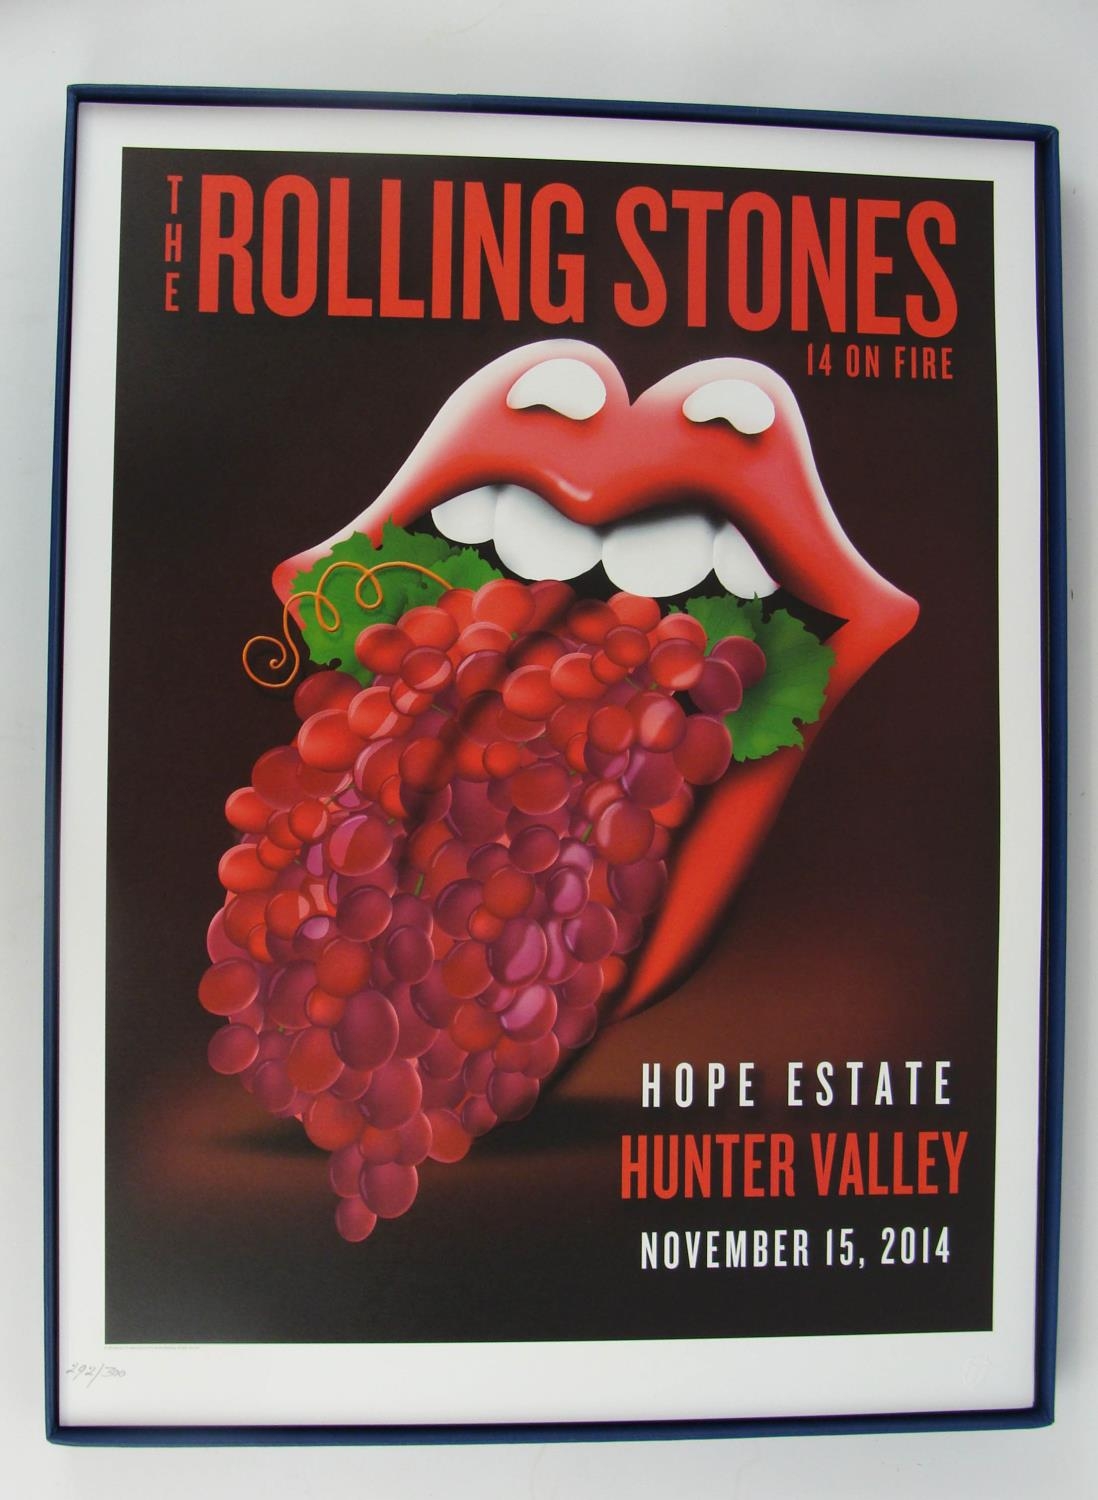 ROLLING STONES '14 on FIRE' BOX SET, of 13 lithographic posters from the 2014 Australia and New - Image 19 of 21